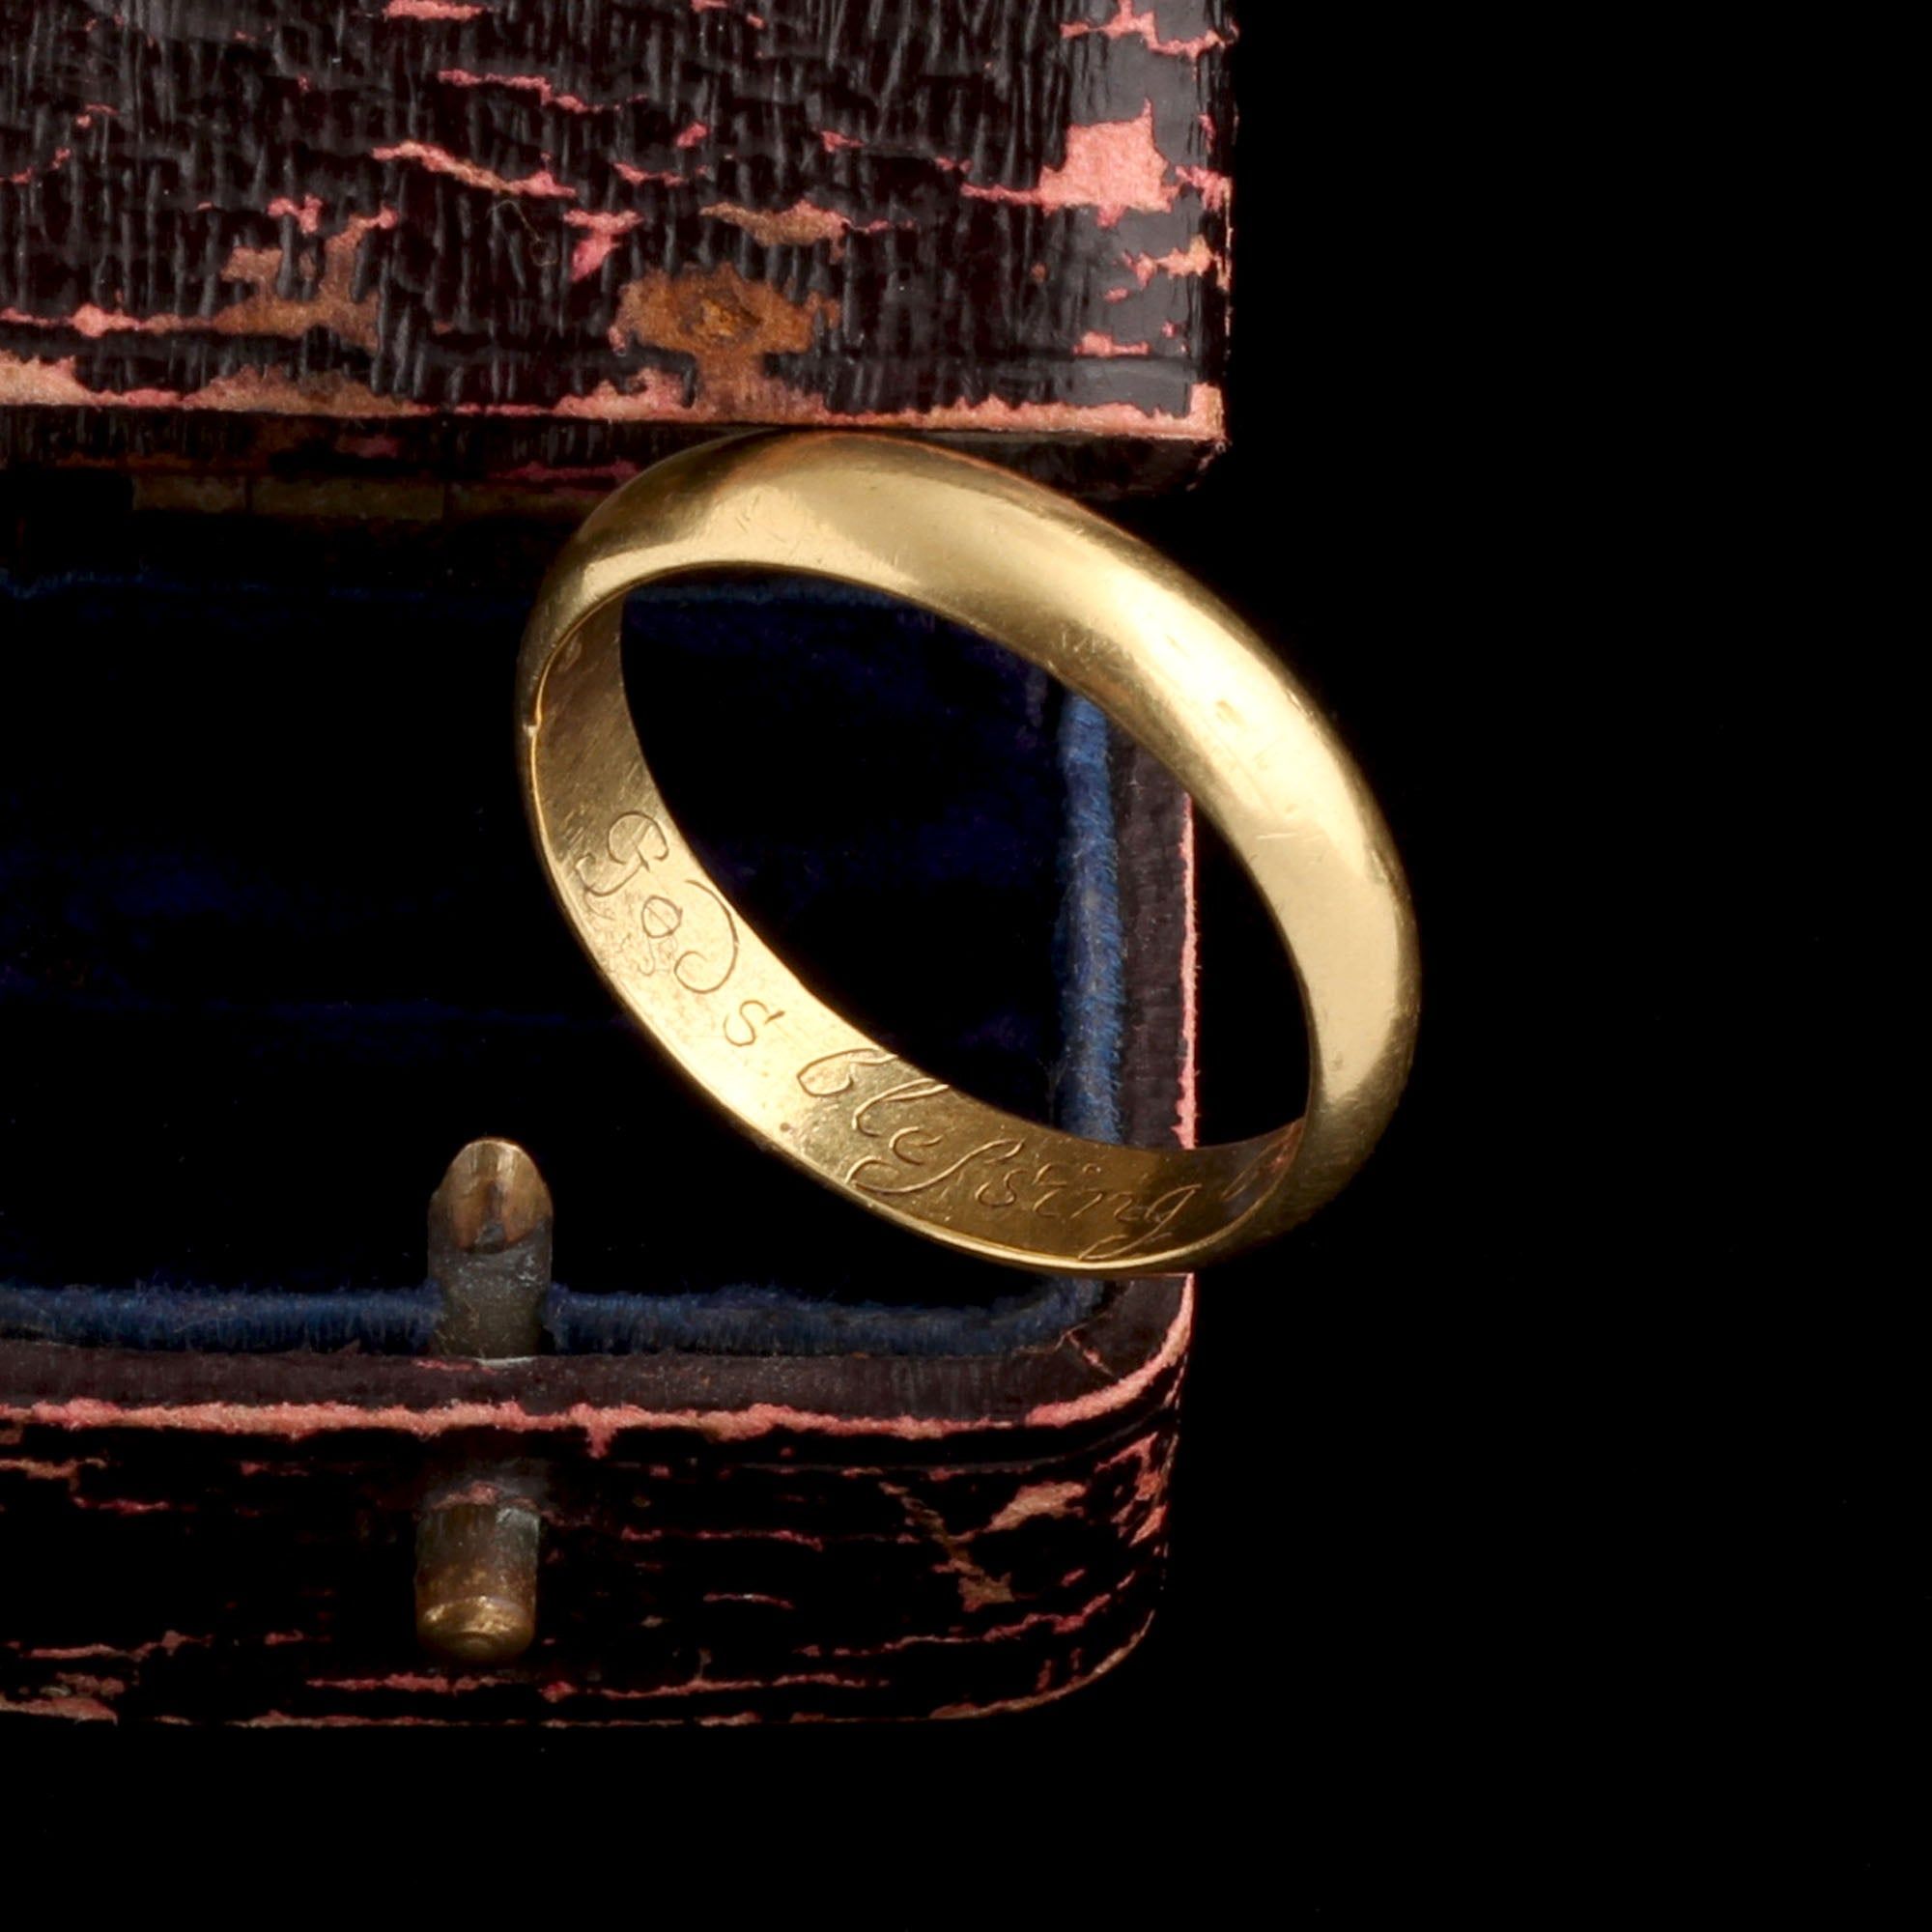 Late 18th Century "Gods Blessing Be" Posy Ring